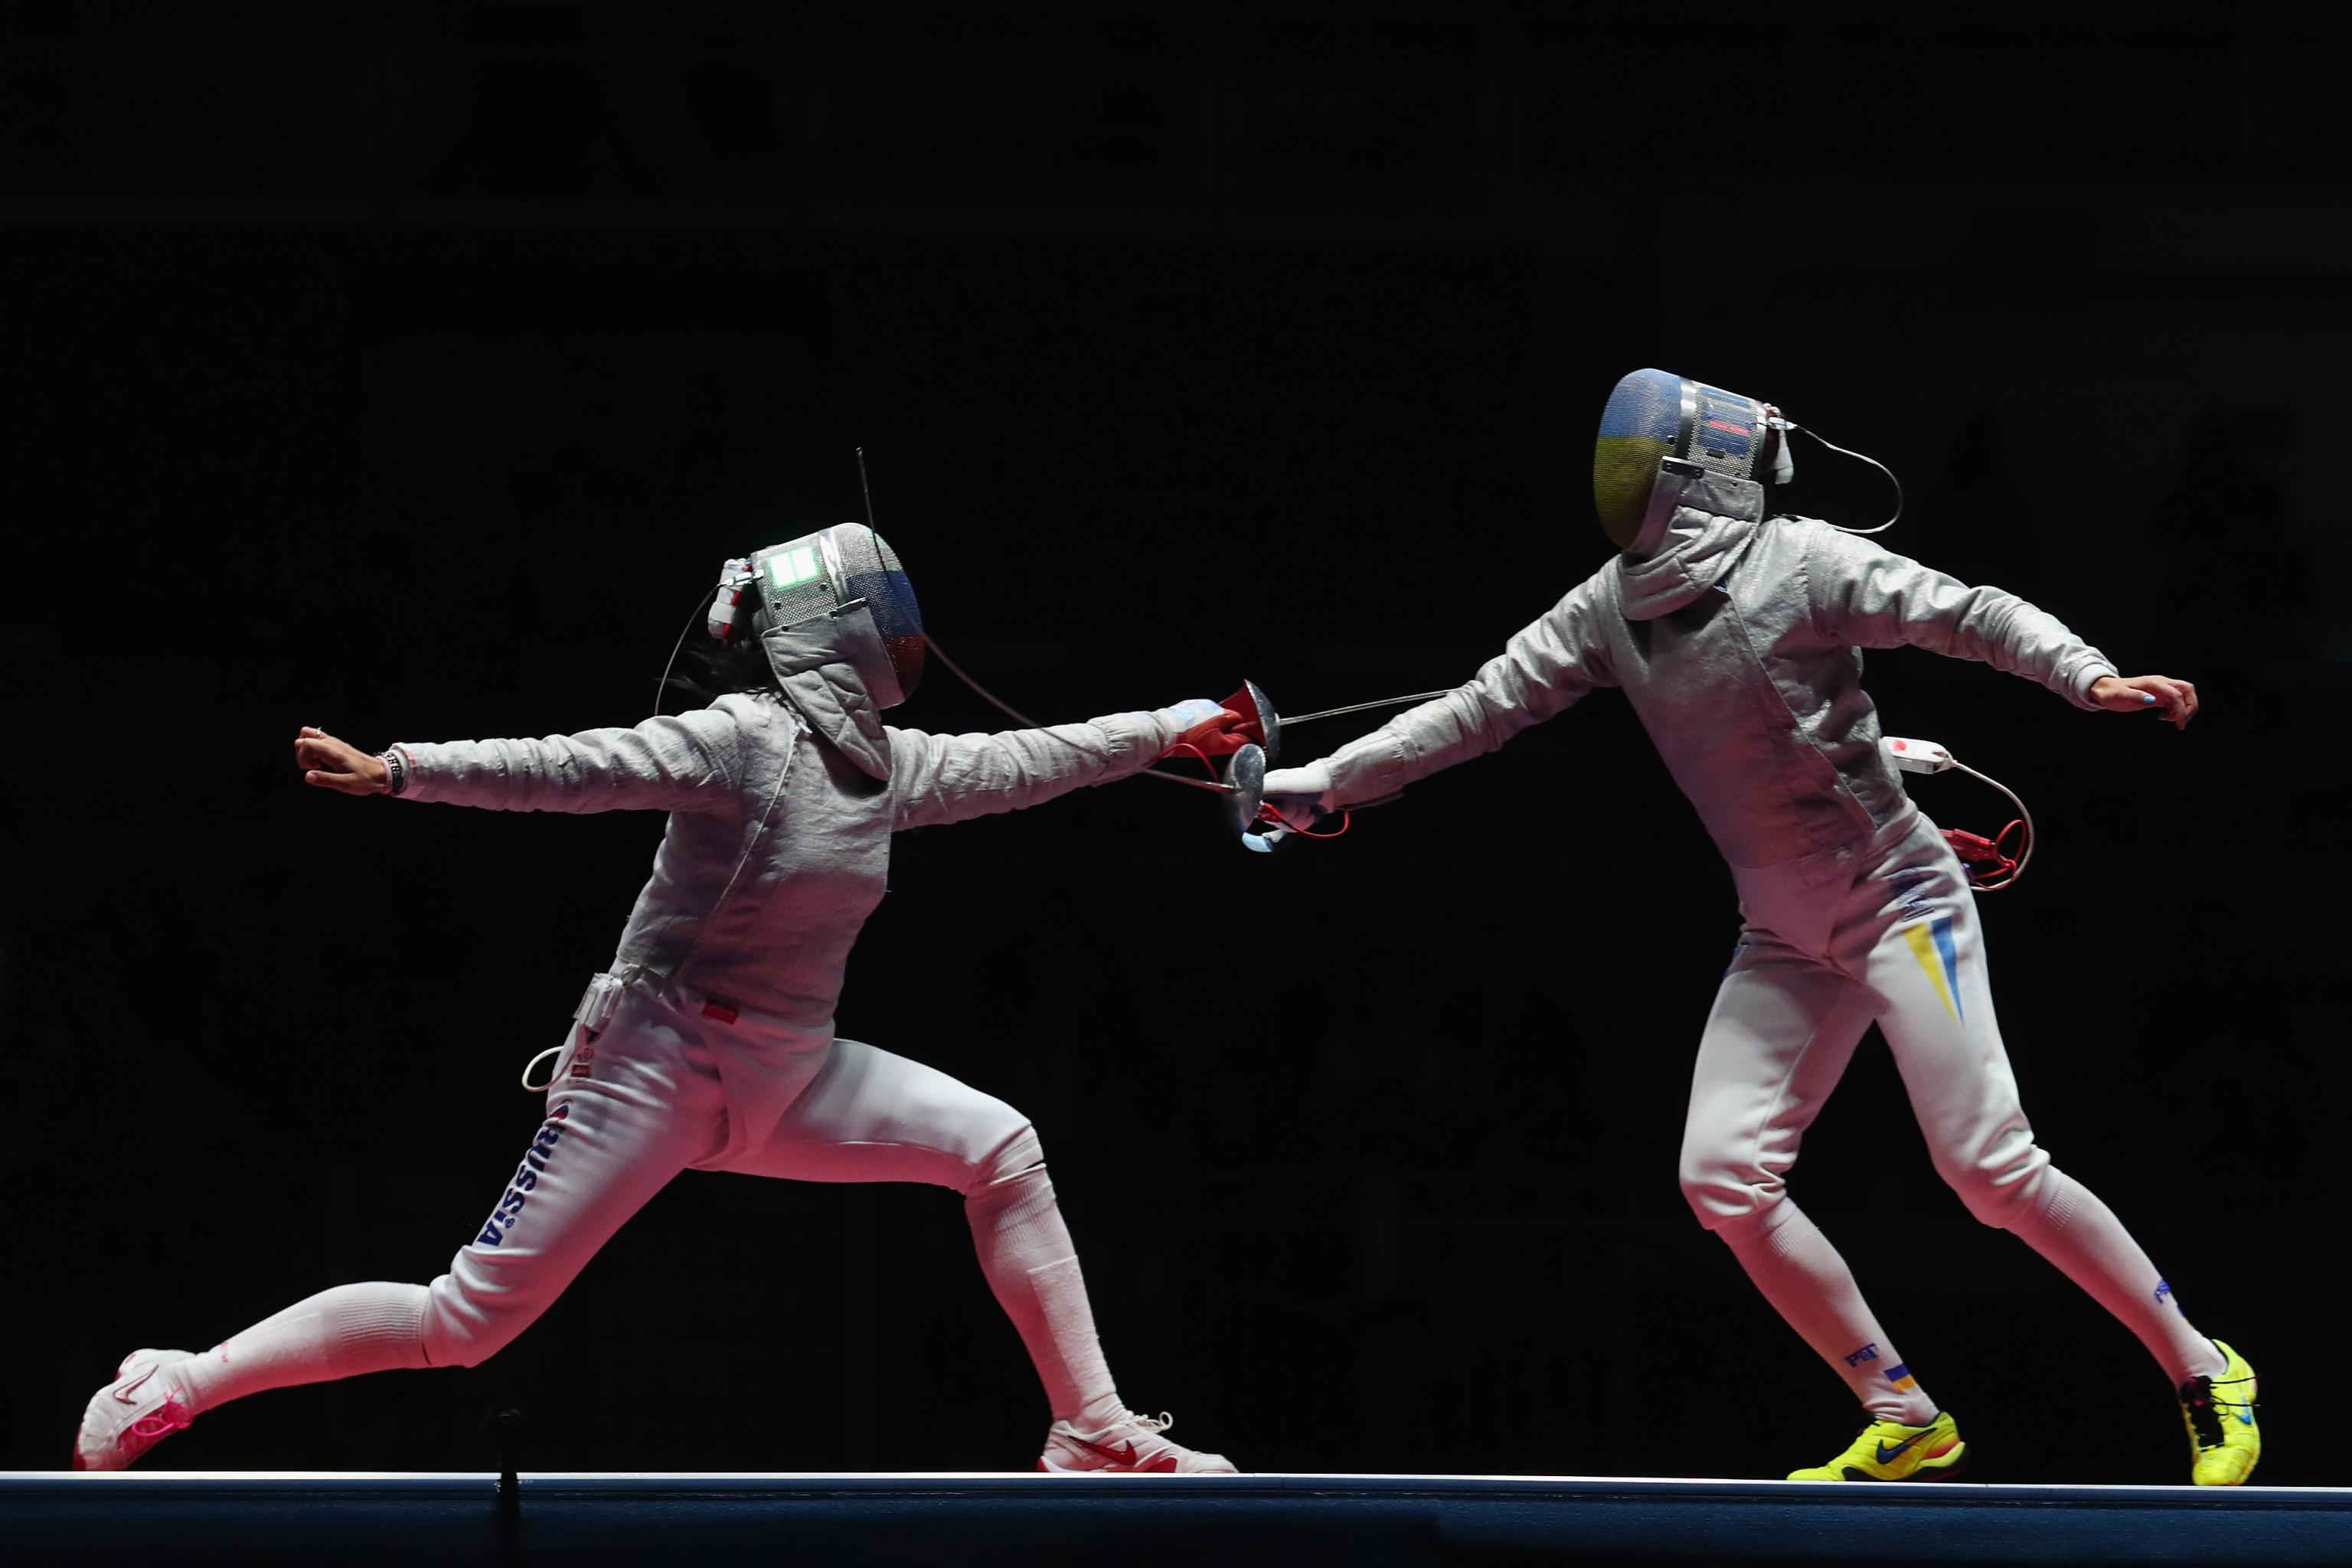 Olympic Fencing 2016 Saturday's Medal Winners, Scores and Results